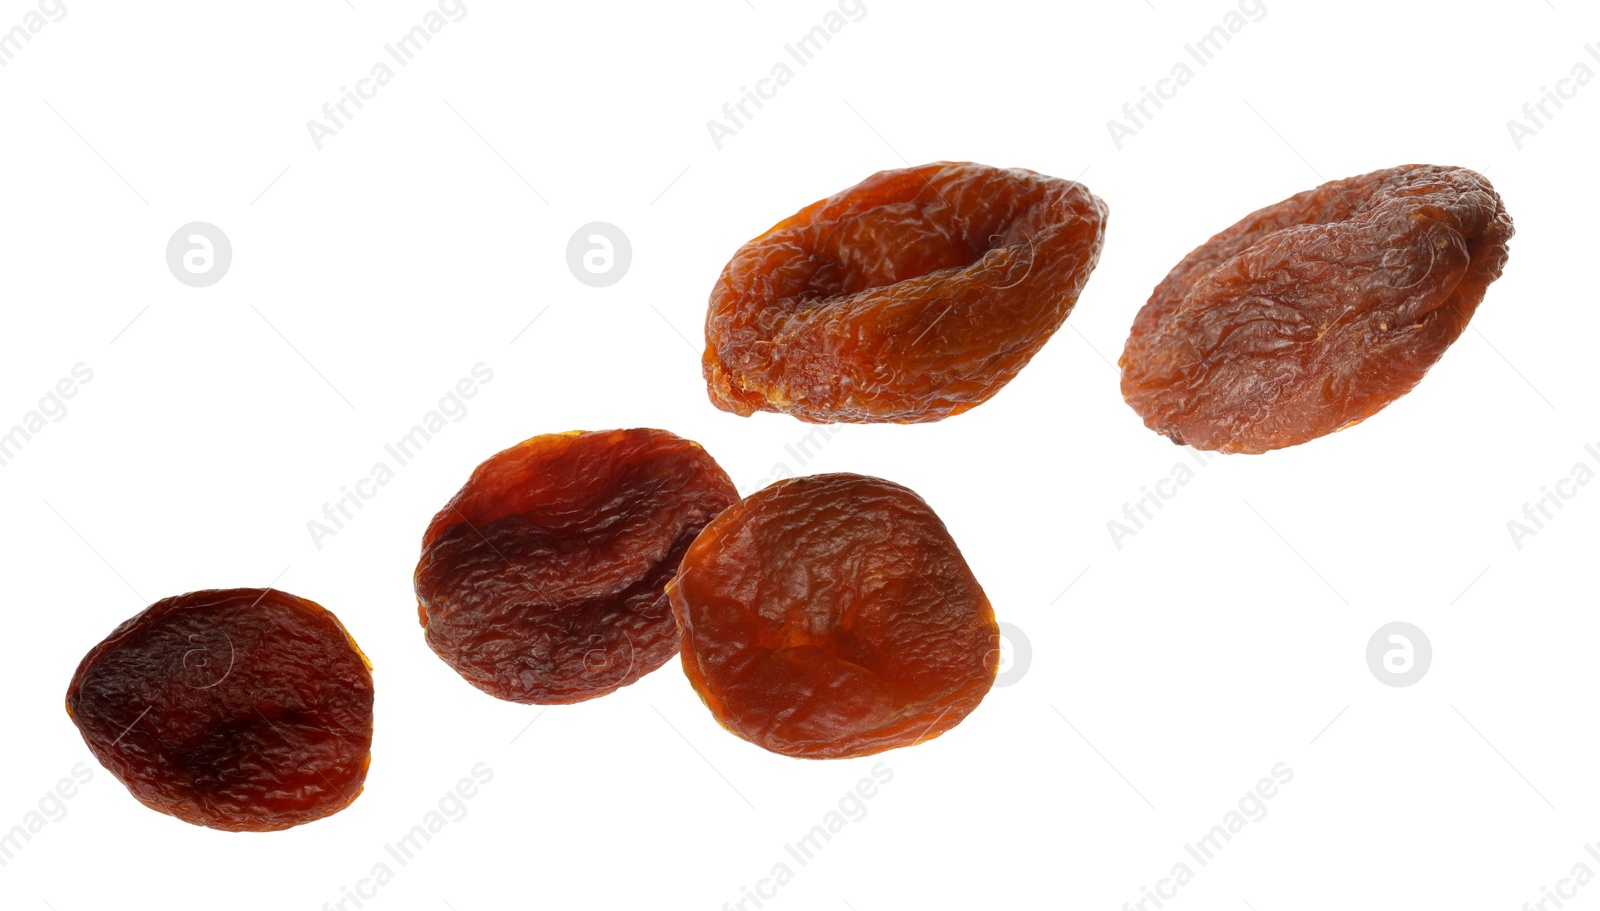 Image of Tasty dried apricots on white background. Banner design